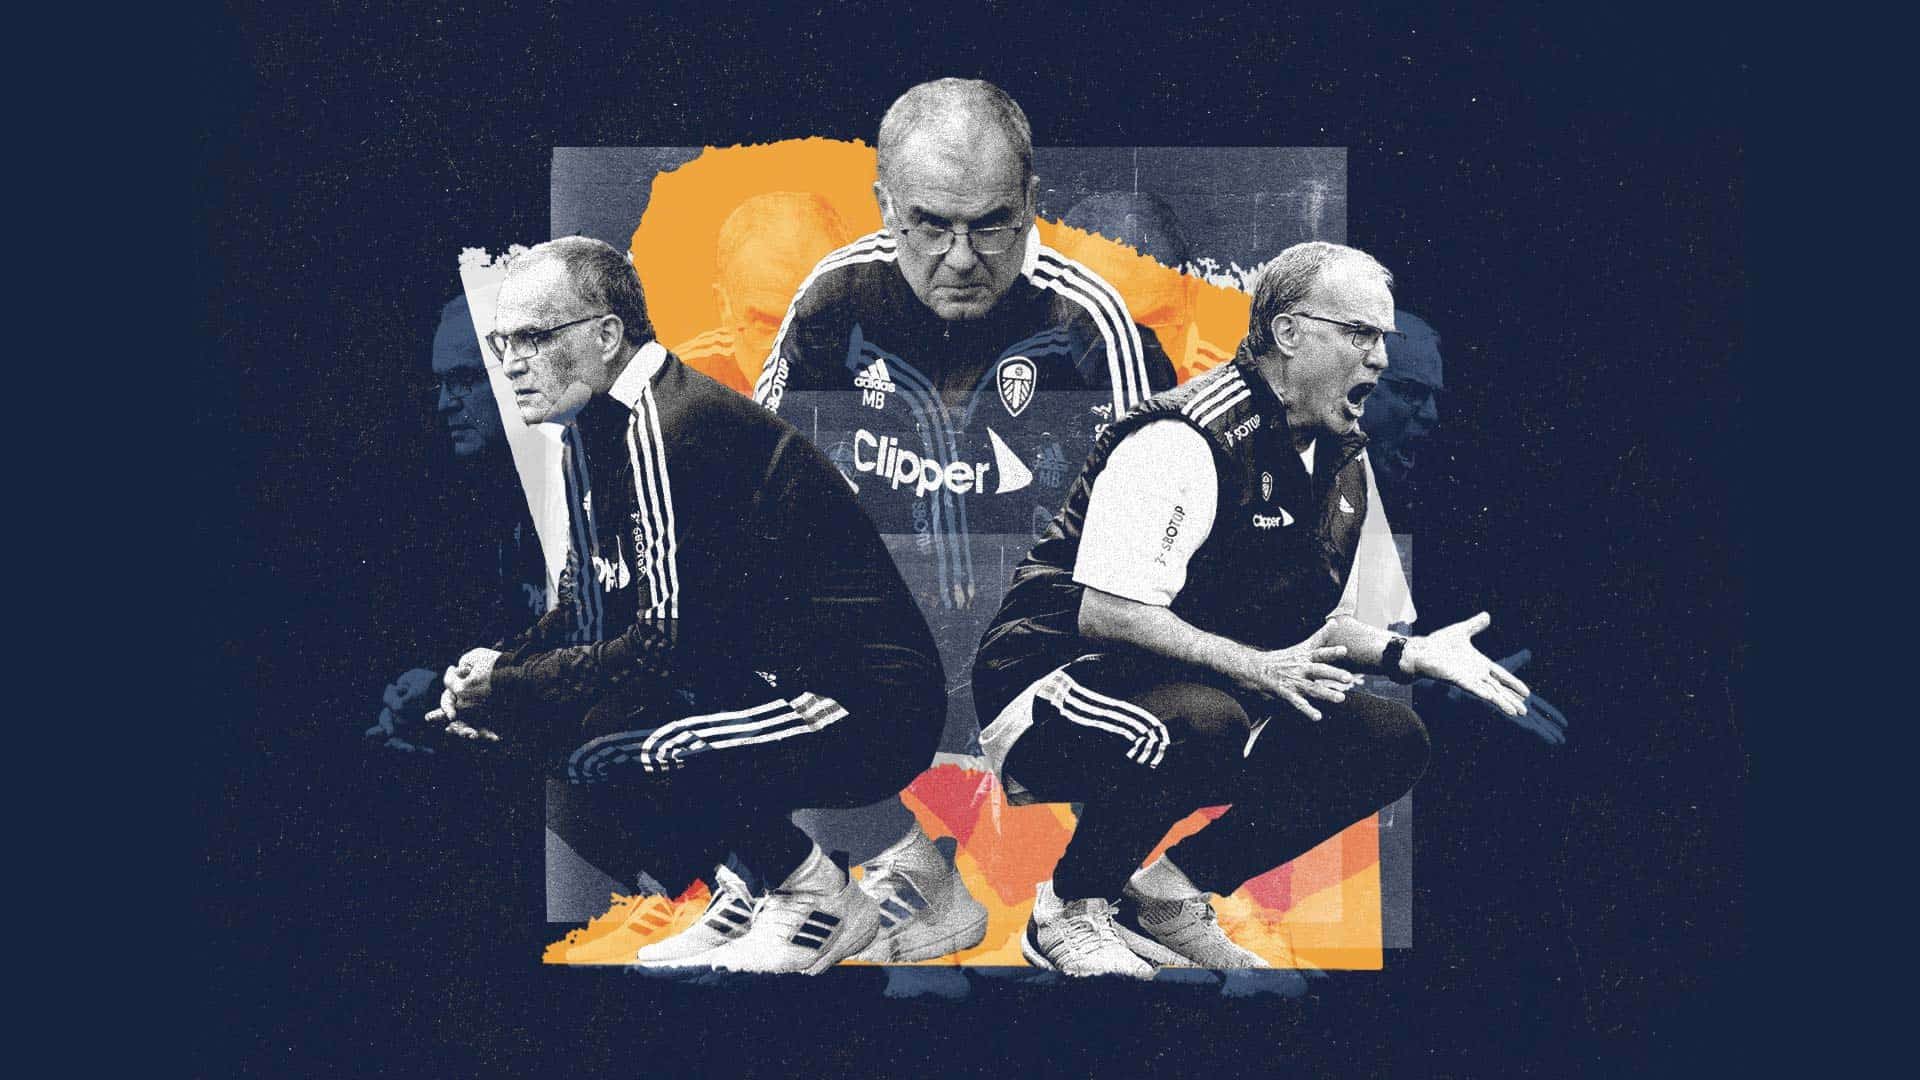 A collage of three Marcelo Bielsa's squatting, for treble the intensity